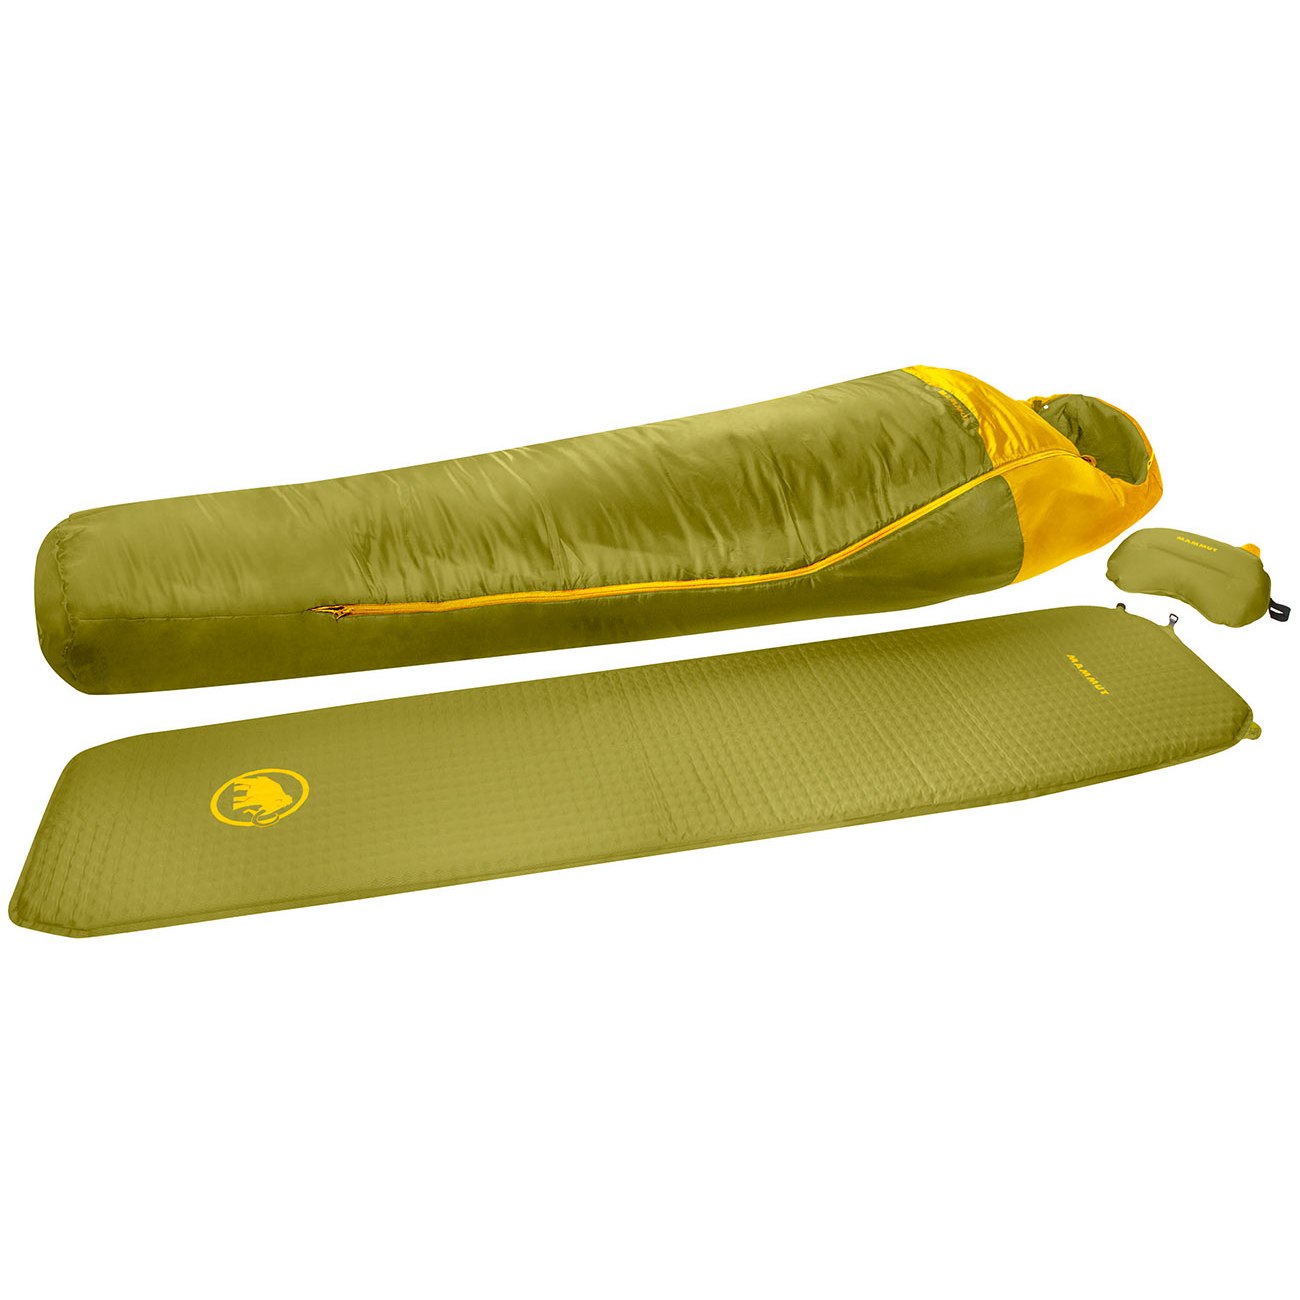 Related  Rolled Up Sleeping Bag  Sleeping Bag And Pillow Clipart